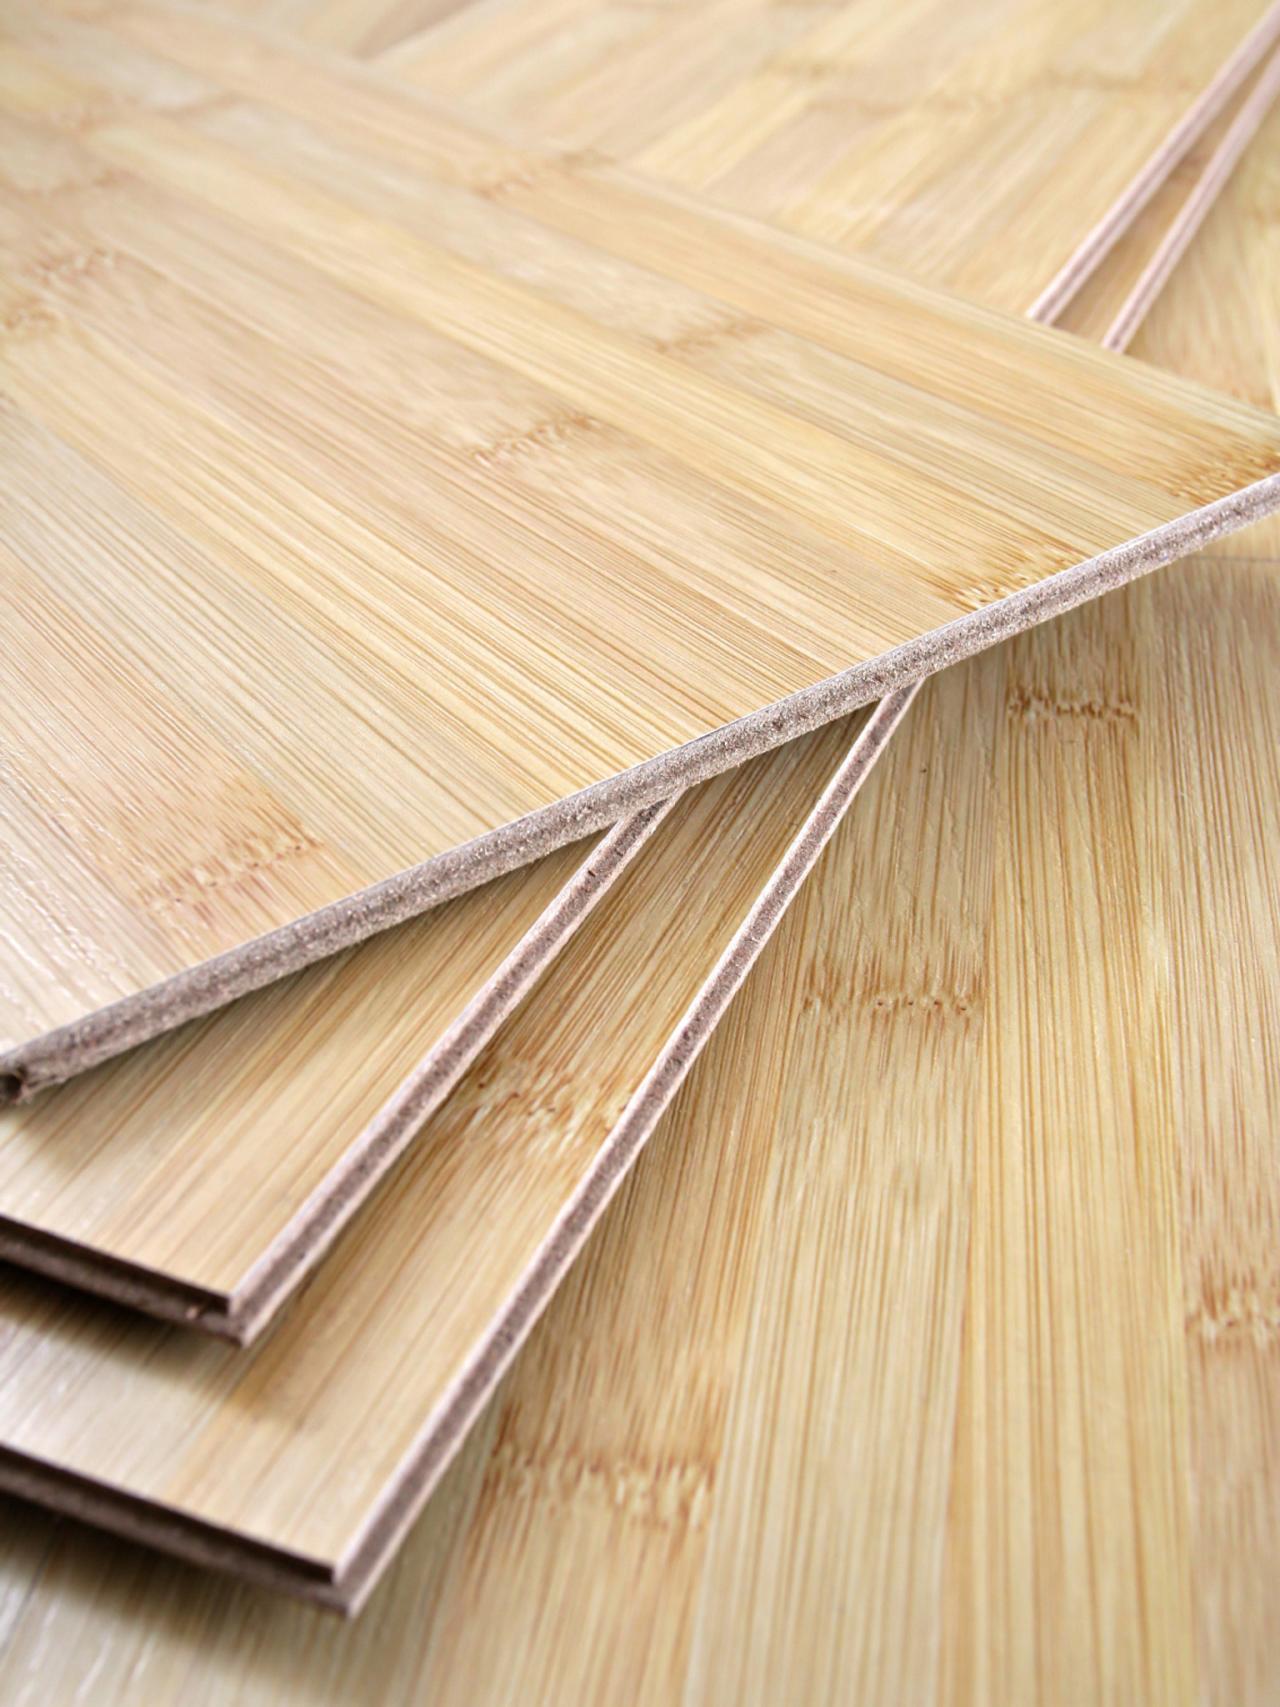 The Pros And Cons Of Bamboo Flooring Diy, Bamboo Flooring On Concrete Basement